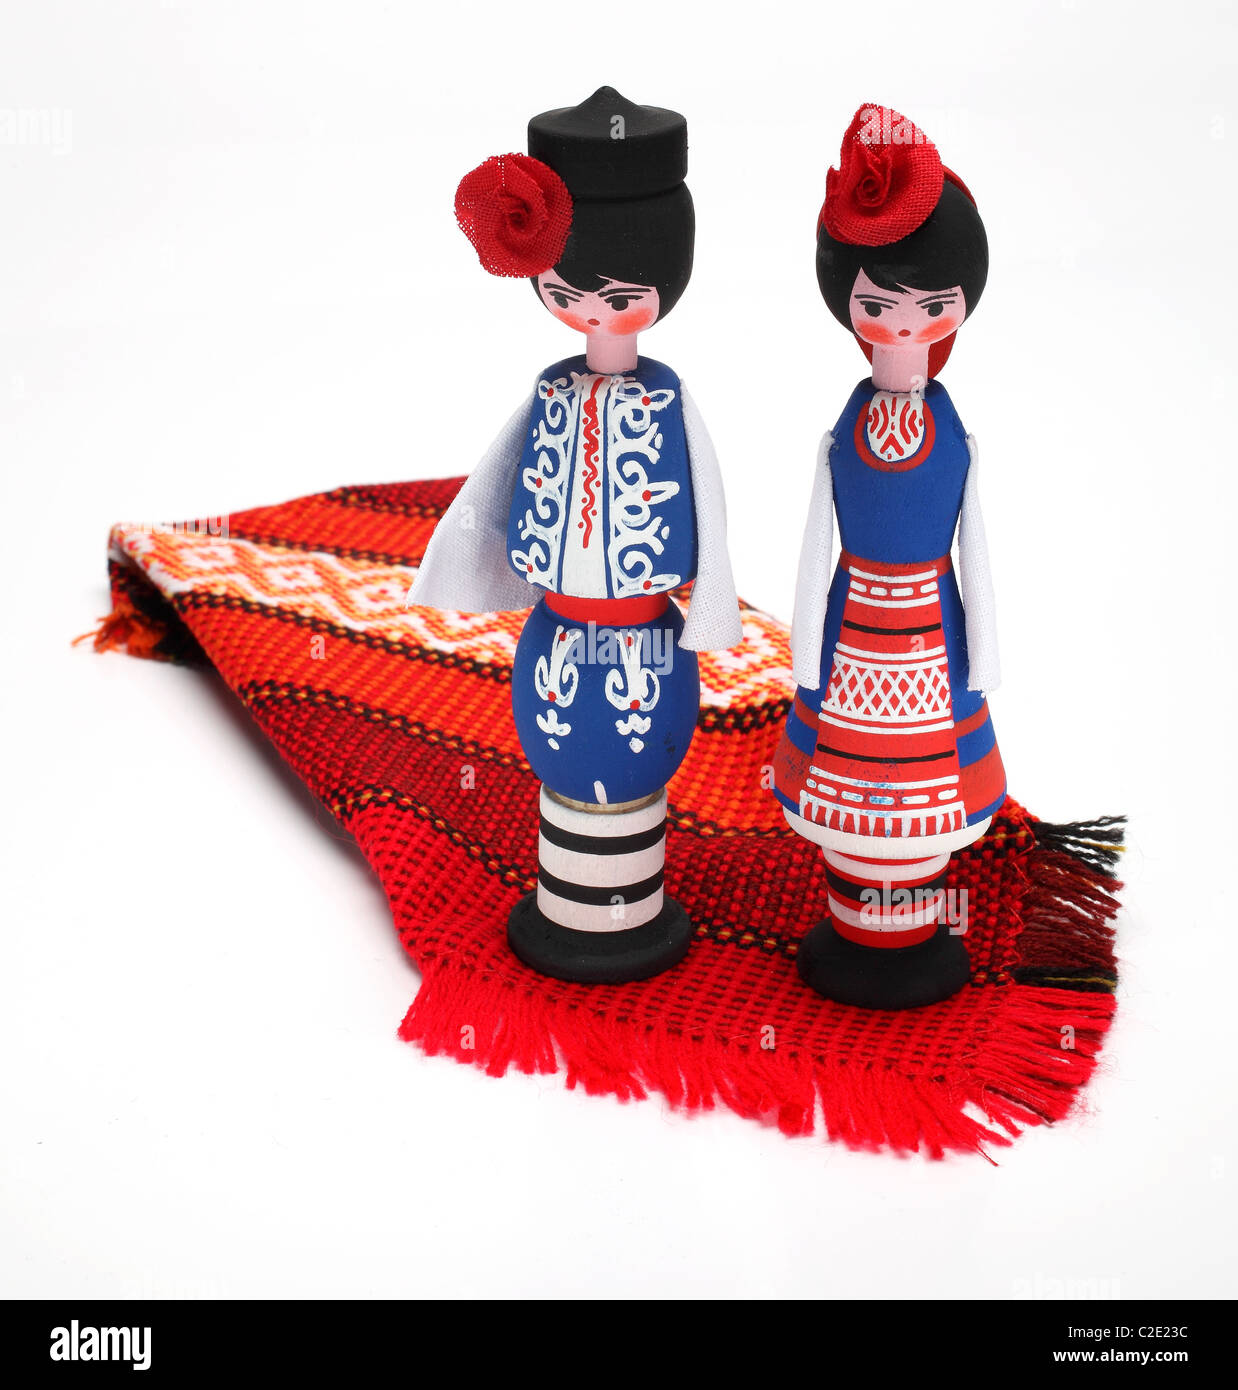 Bulgarian wooden traditional toy souvenirs Stock Photo - Alamy